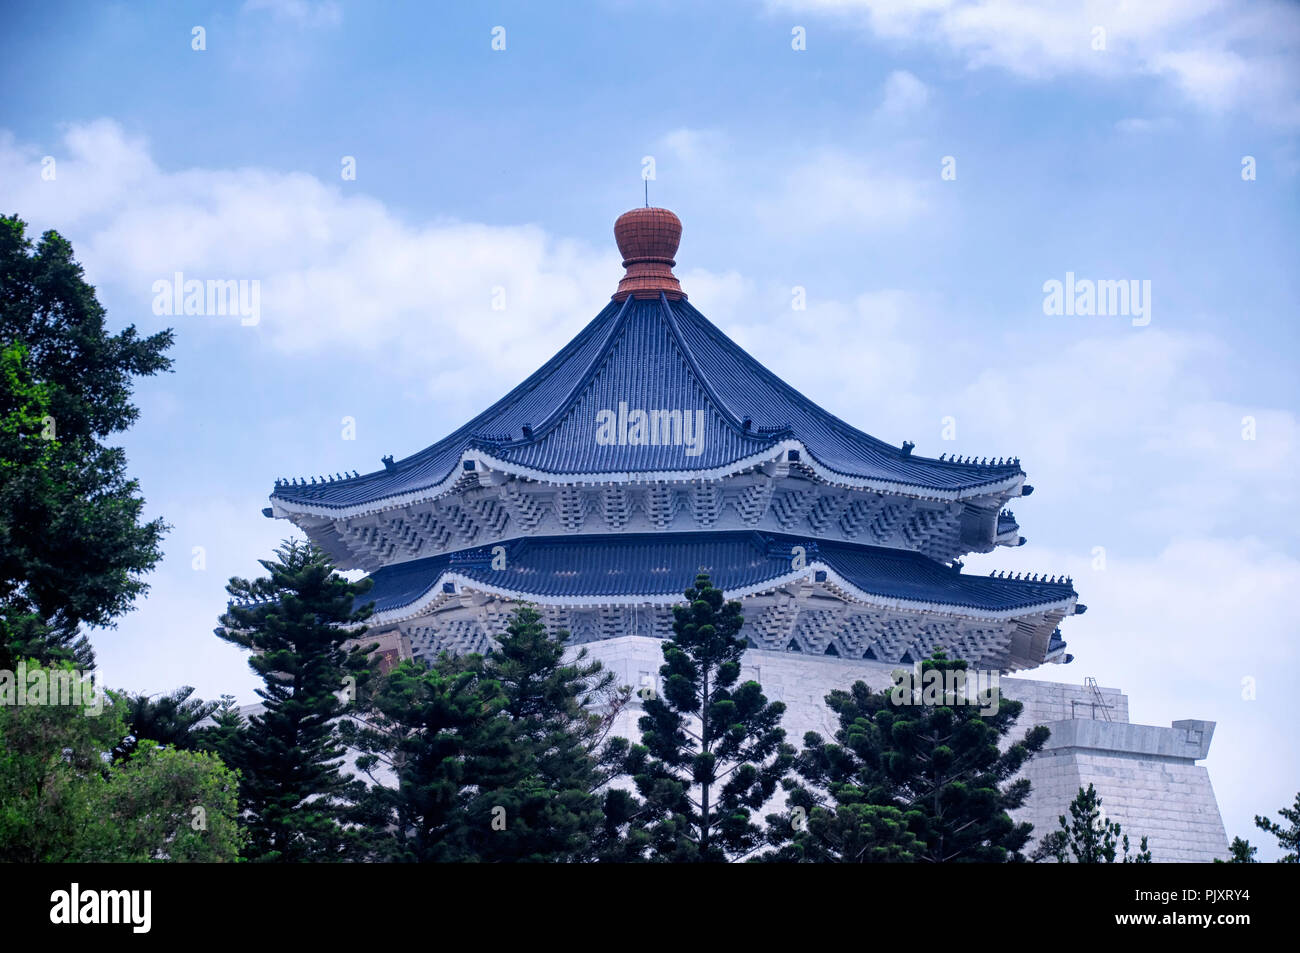 The Chiang Kai-shek Memorial Hall in liberty square in Zhongzheng District of Taipei, Taiwan on an overcast summer day. Stock Photo